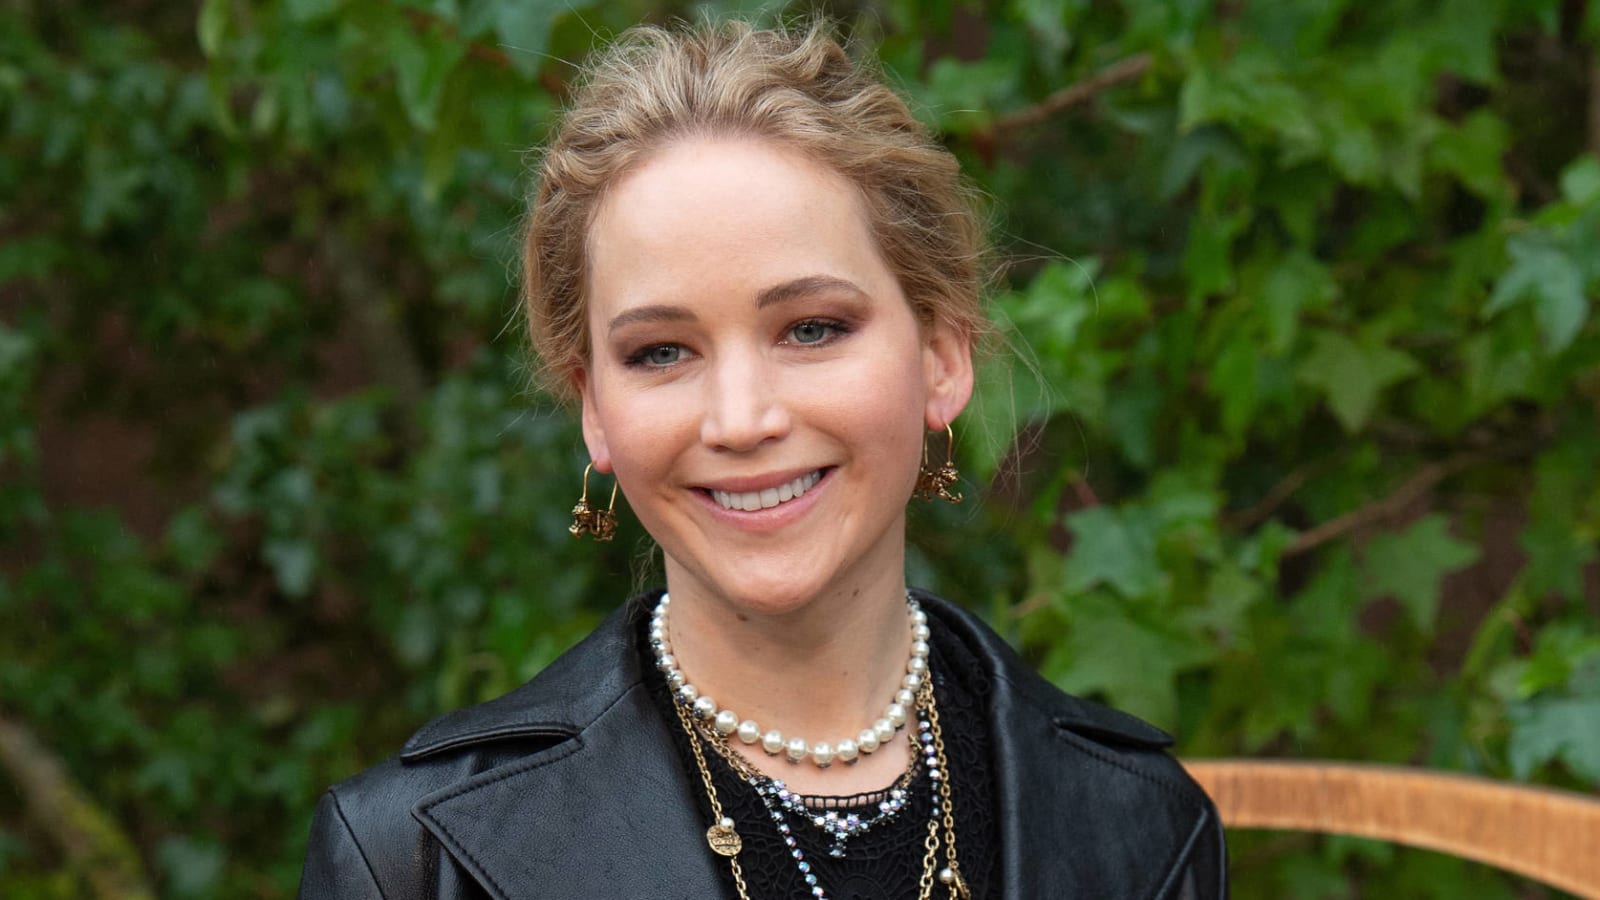 Jennifer Lawrence plans to keep her baby's life private